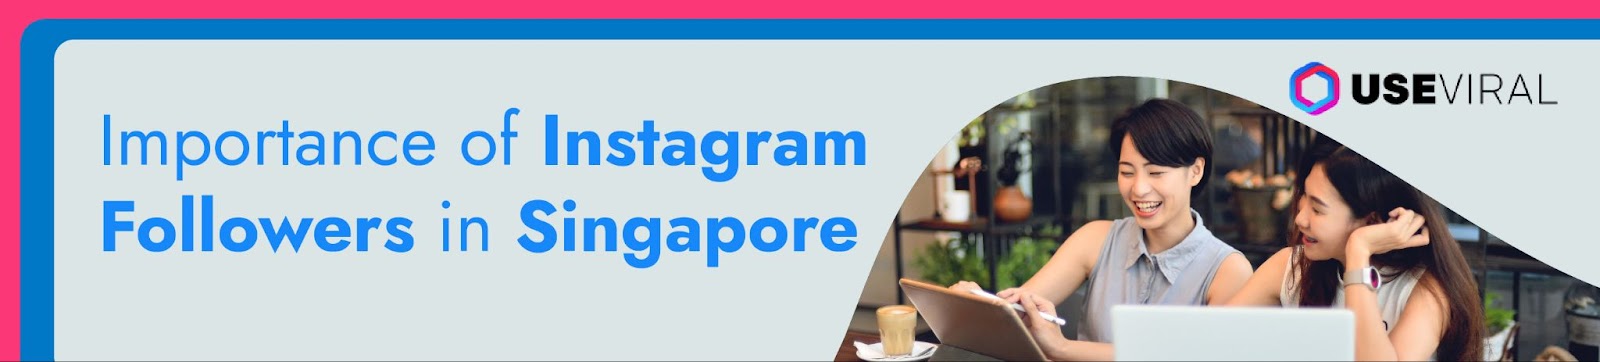 Importance of Instagram Followers in Singapore